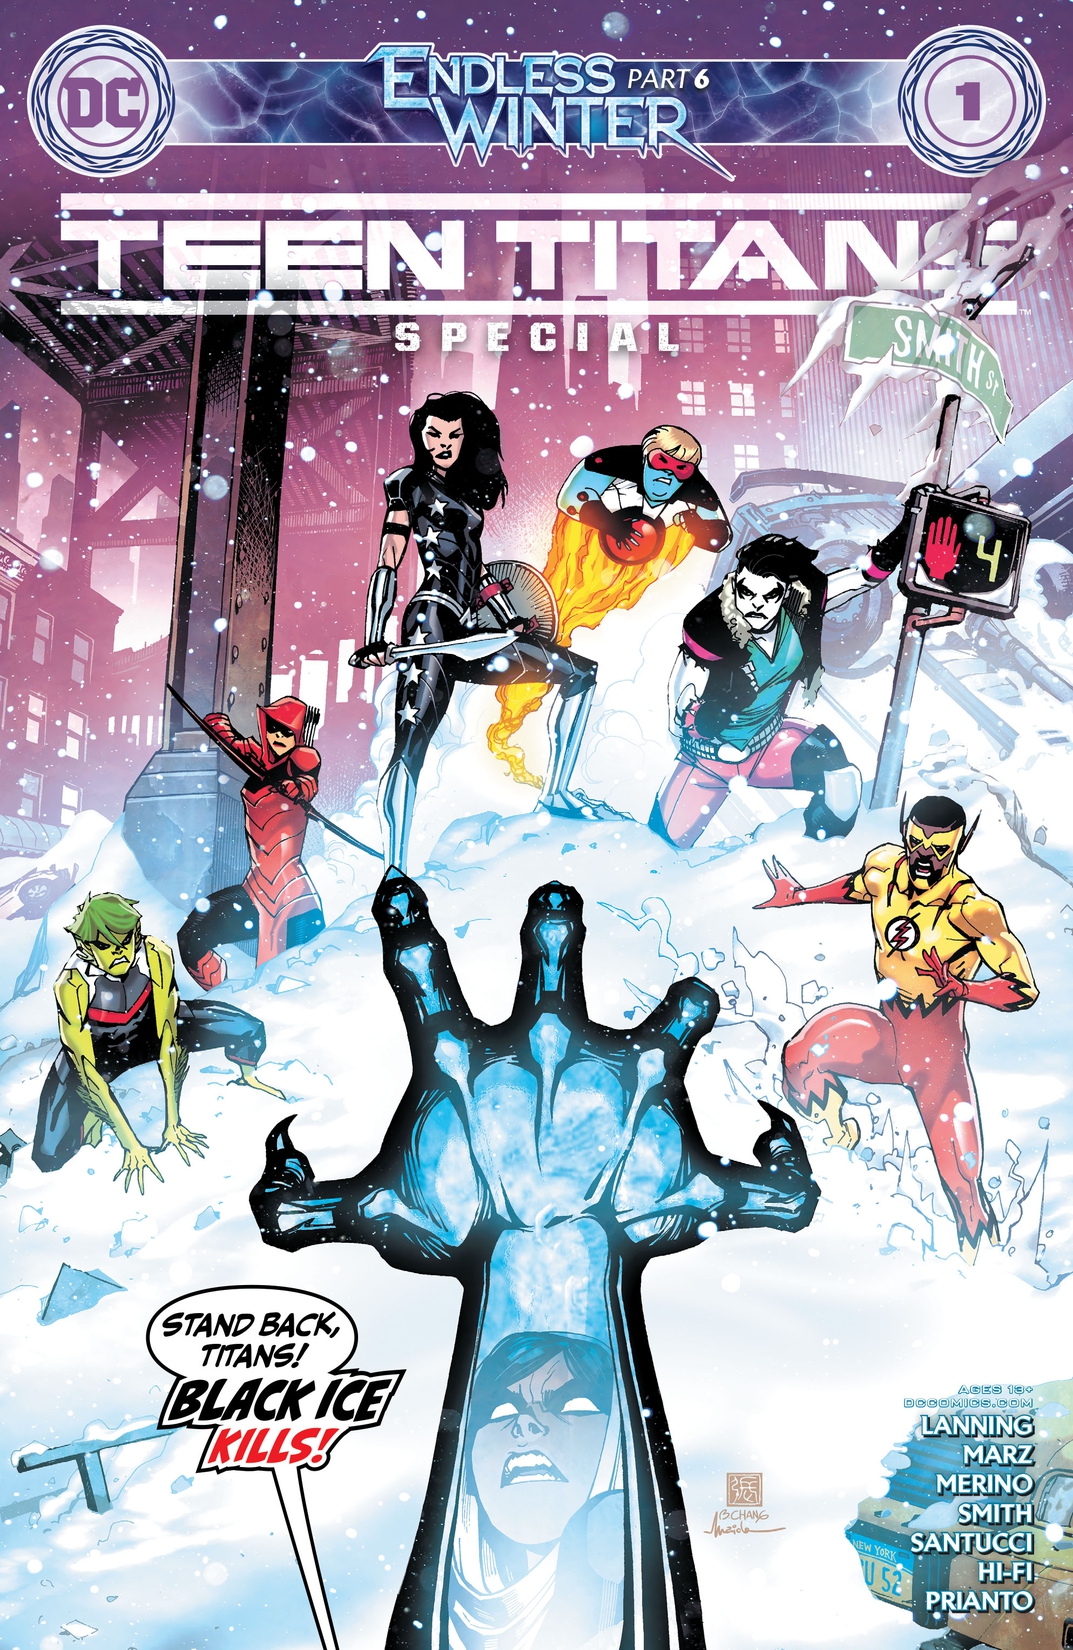 Teen Titans: Endless Winter Special #1 preview images